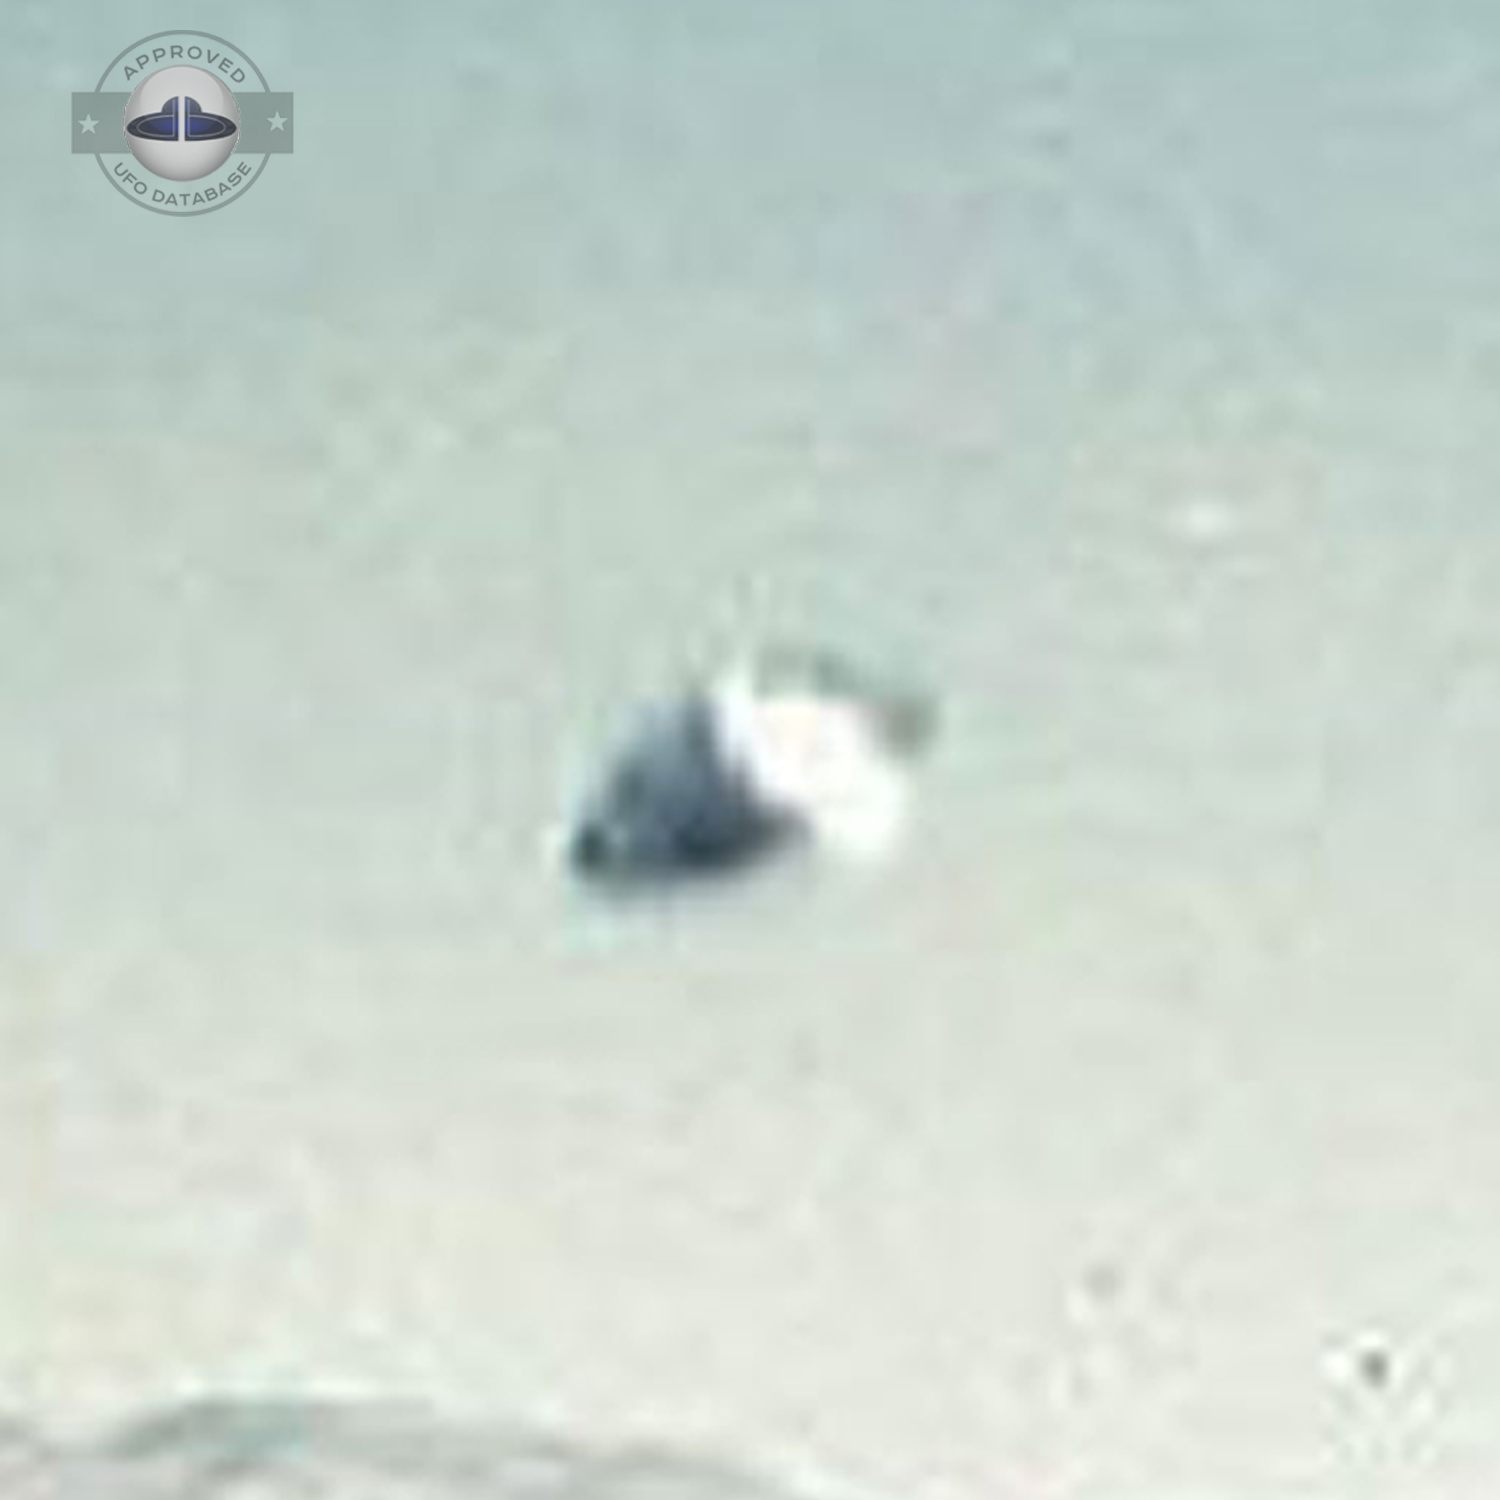 UFO pictures - UFO over mountains in the state of New Mexico UFO Picture #8-3